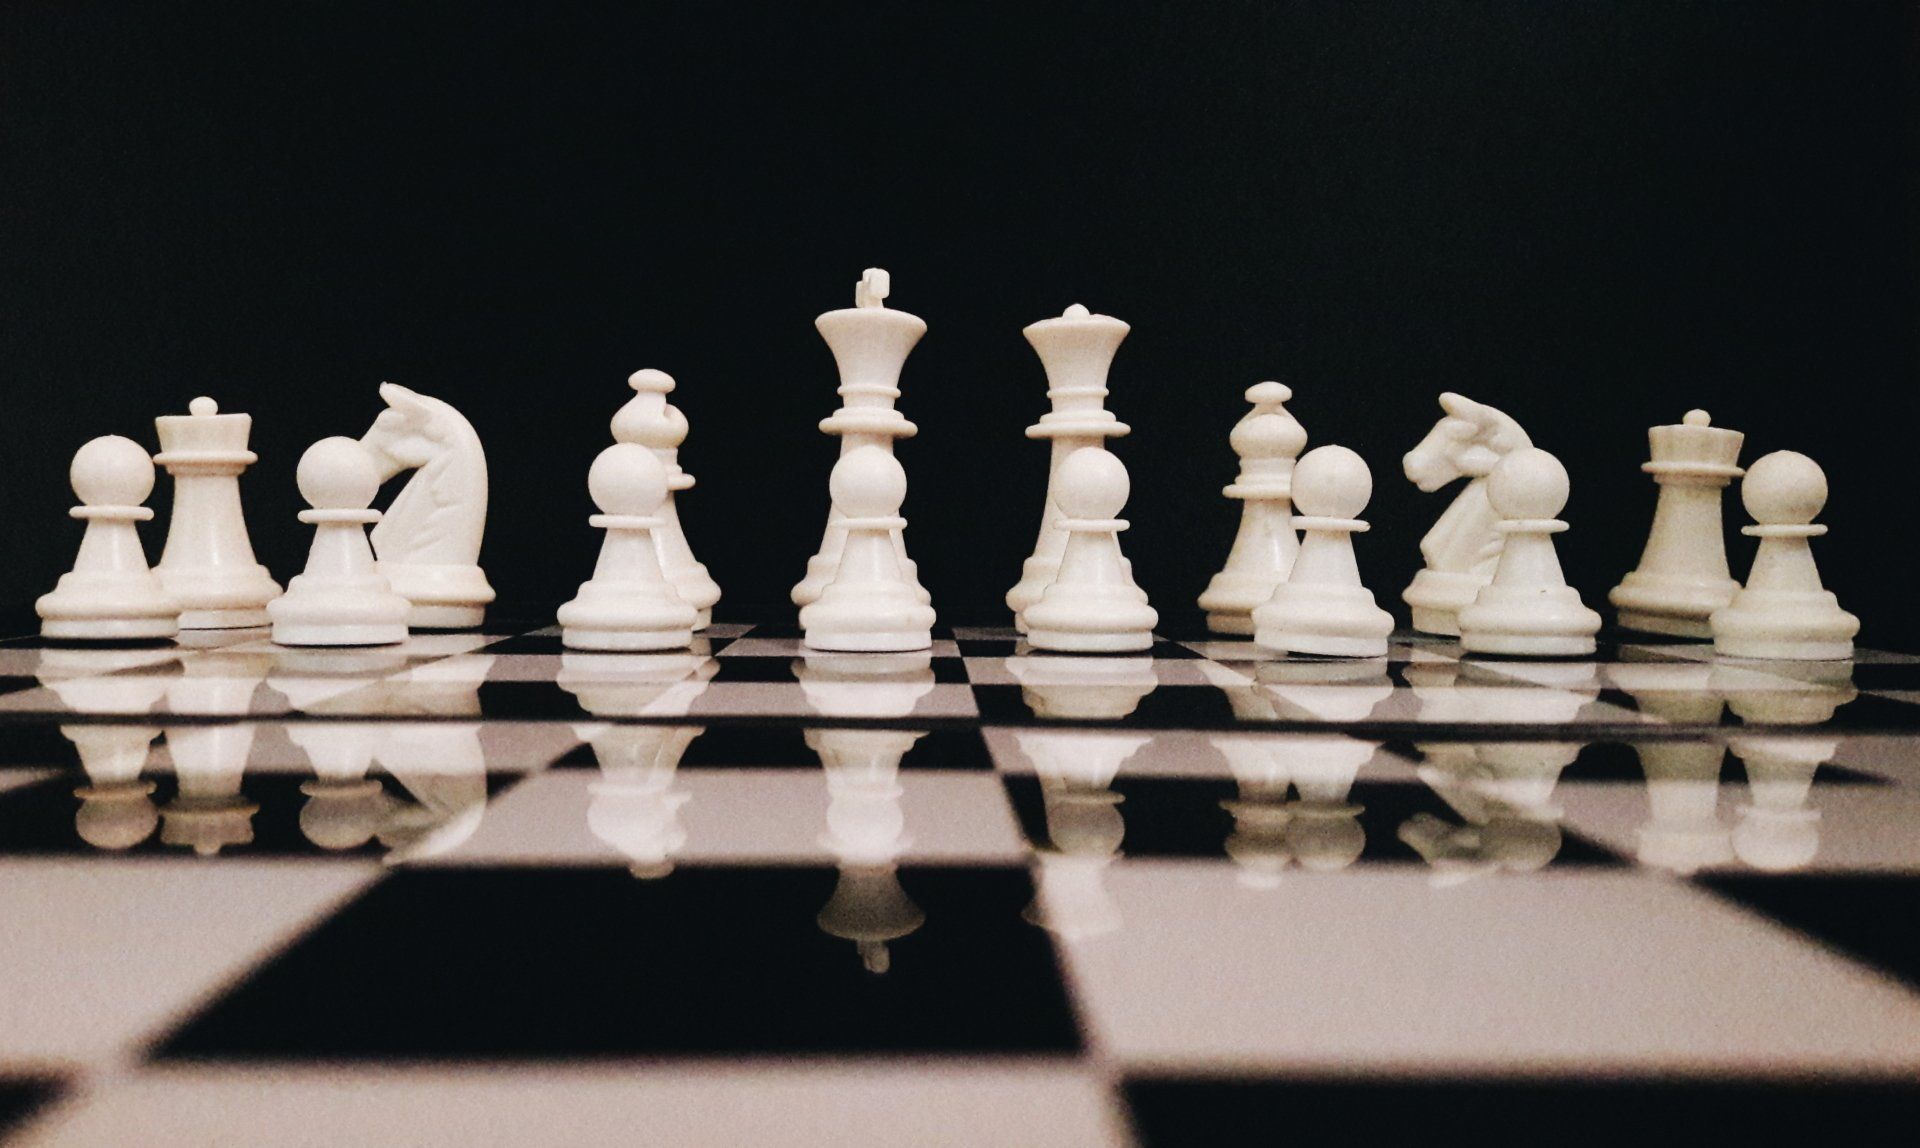 white chess pieces on a black and white board - change the game with our dream team